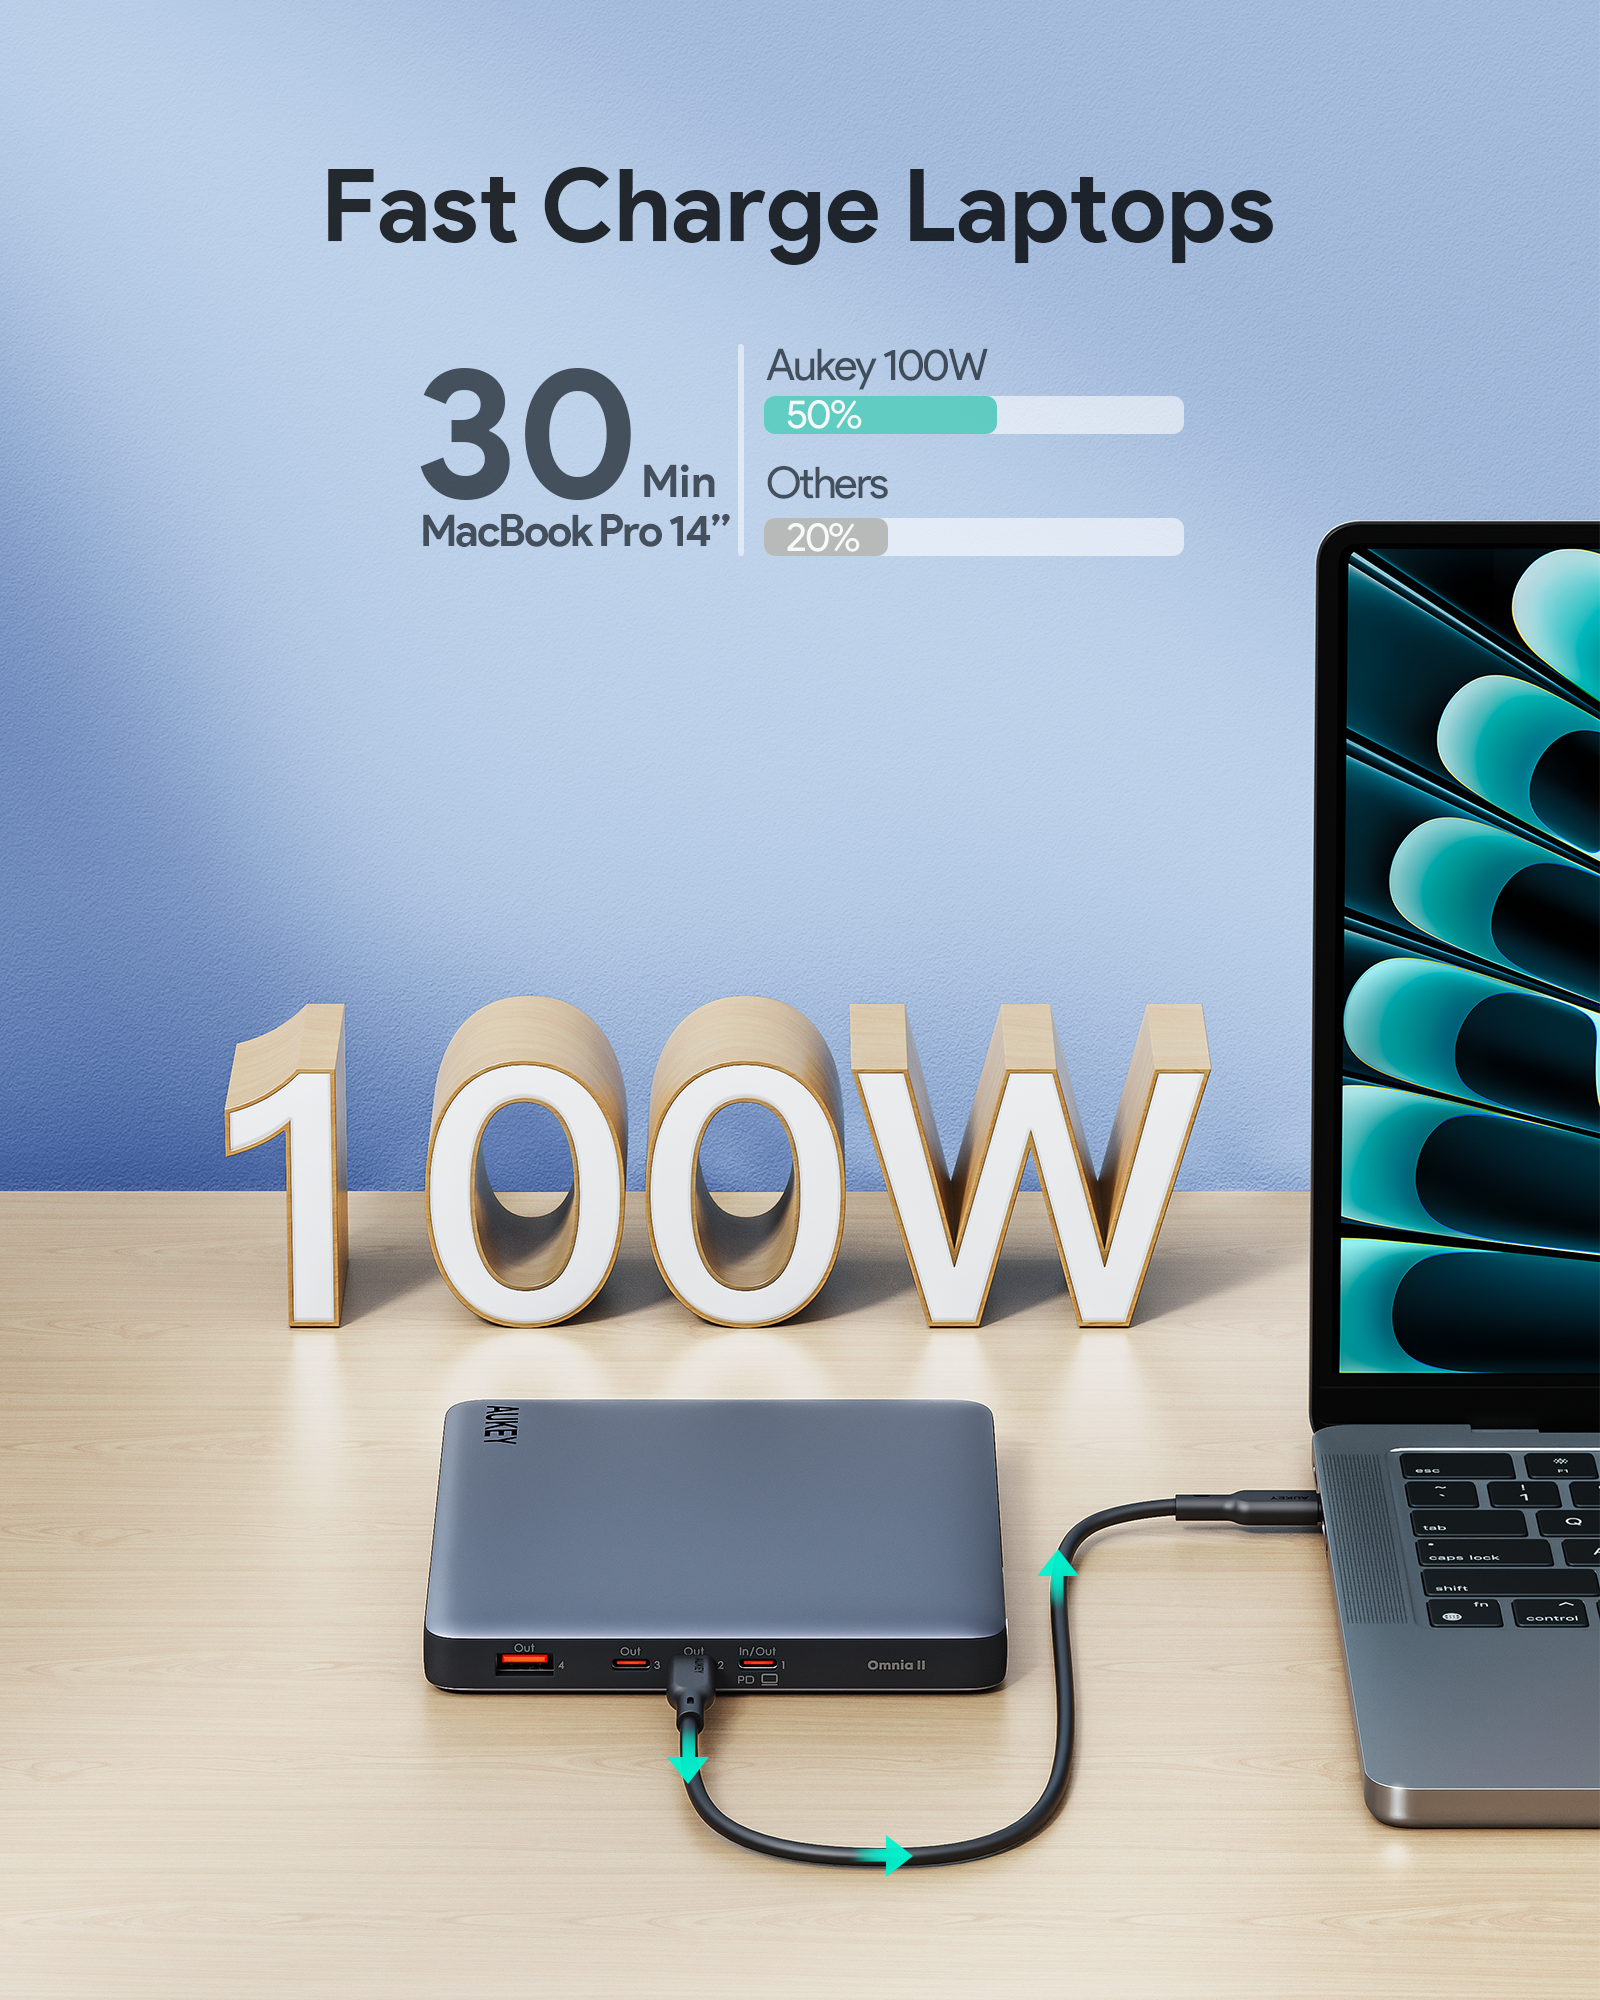 Aukey PB-Y44 SprintX Power Bank With PD 3.0 QC3.0 For Mobile Devices & USB C Laptop (100W/20000mAh)